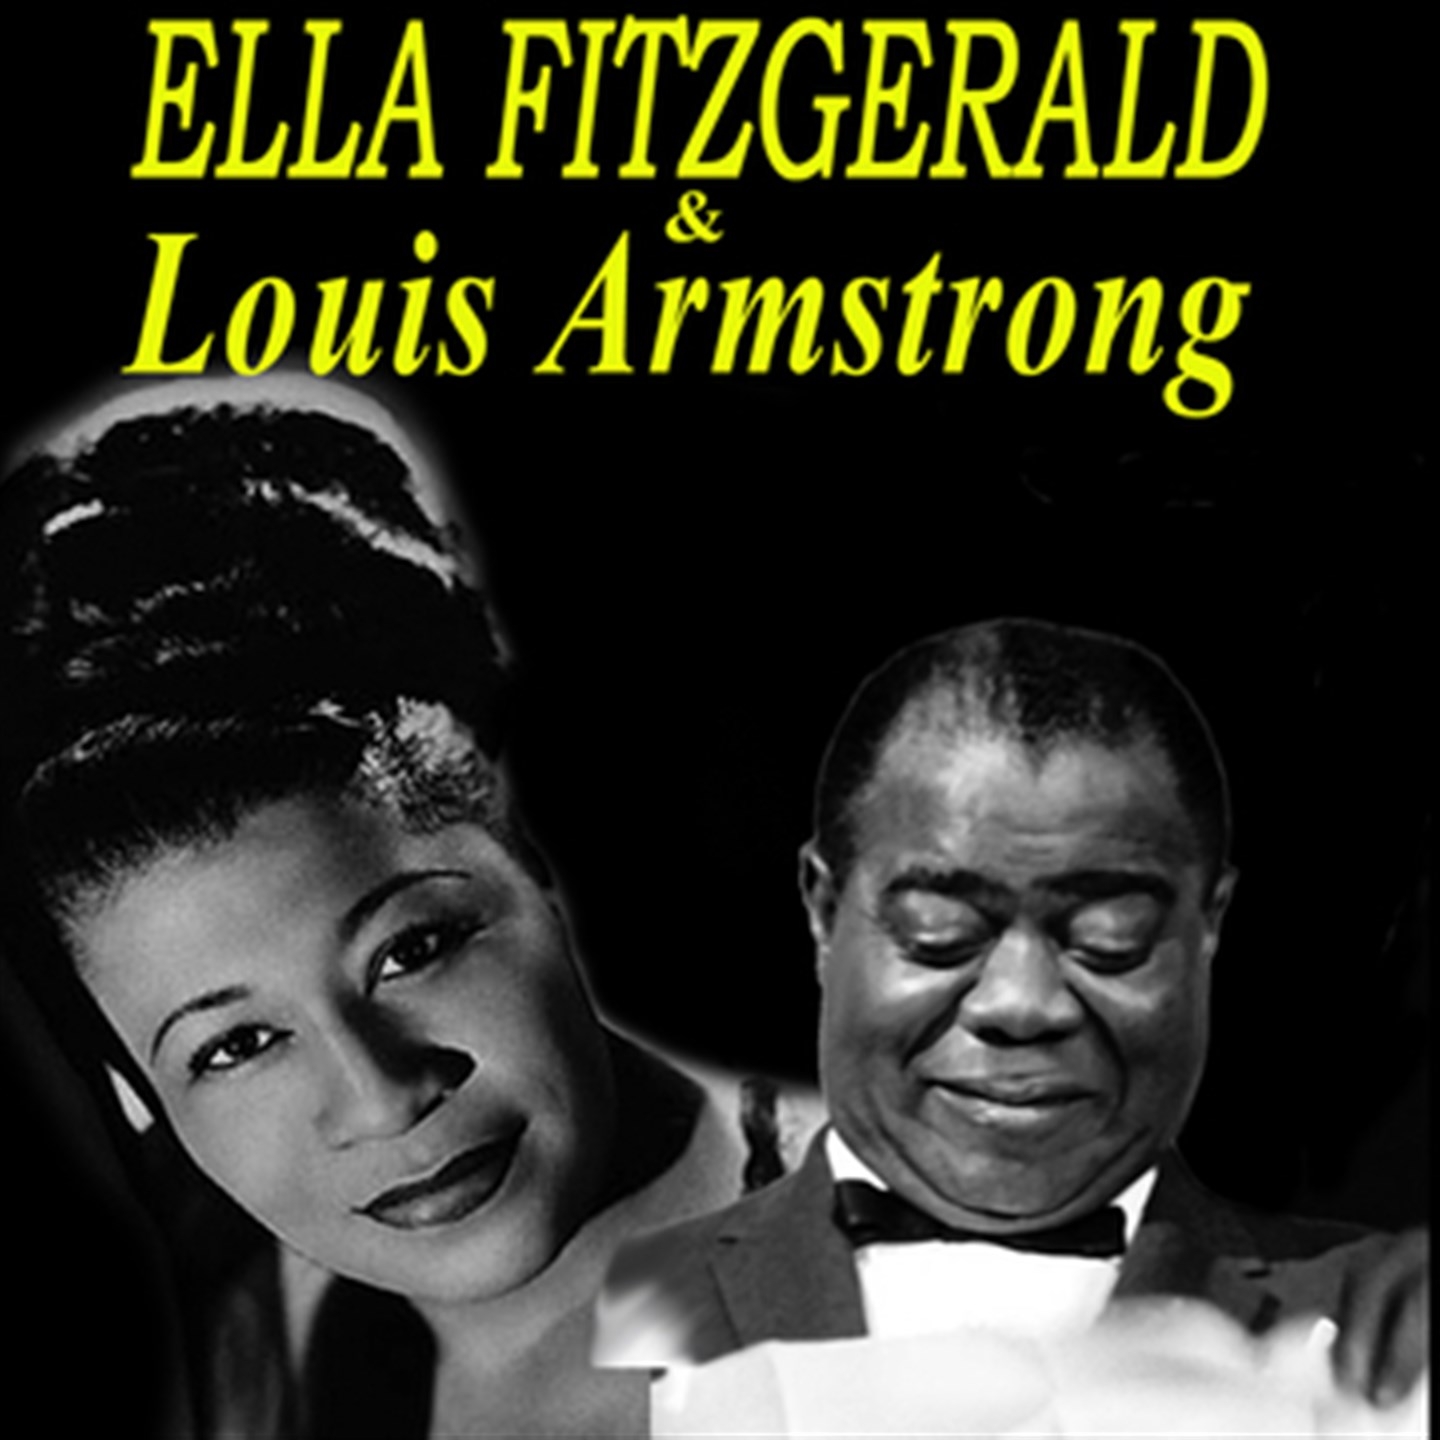 Ella fitzgerald & Louis Armstrong Deluxe (Remastered Edition)